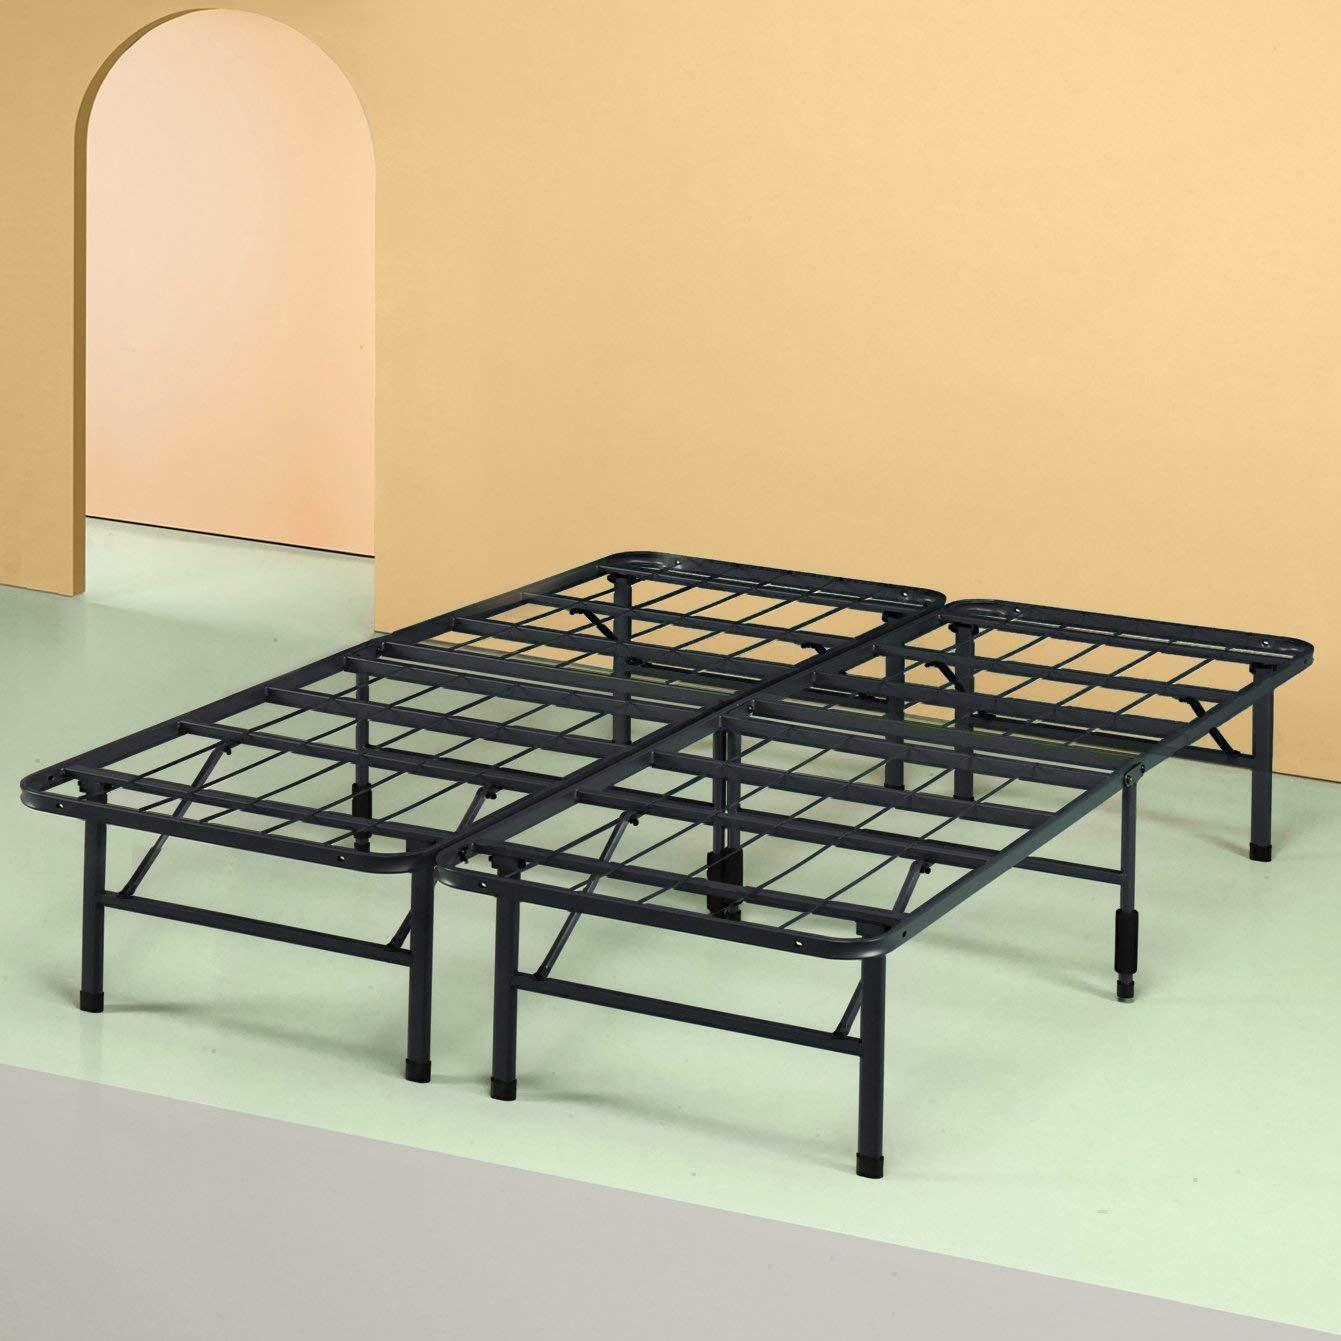 19 Best Metal Bed Frames 2022 The, How To Fix Metal Bed Frame Legs